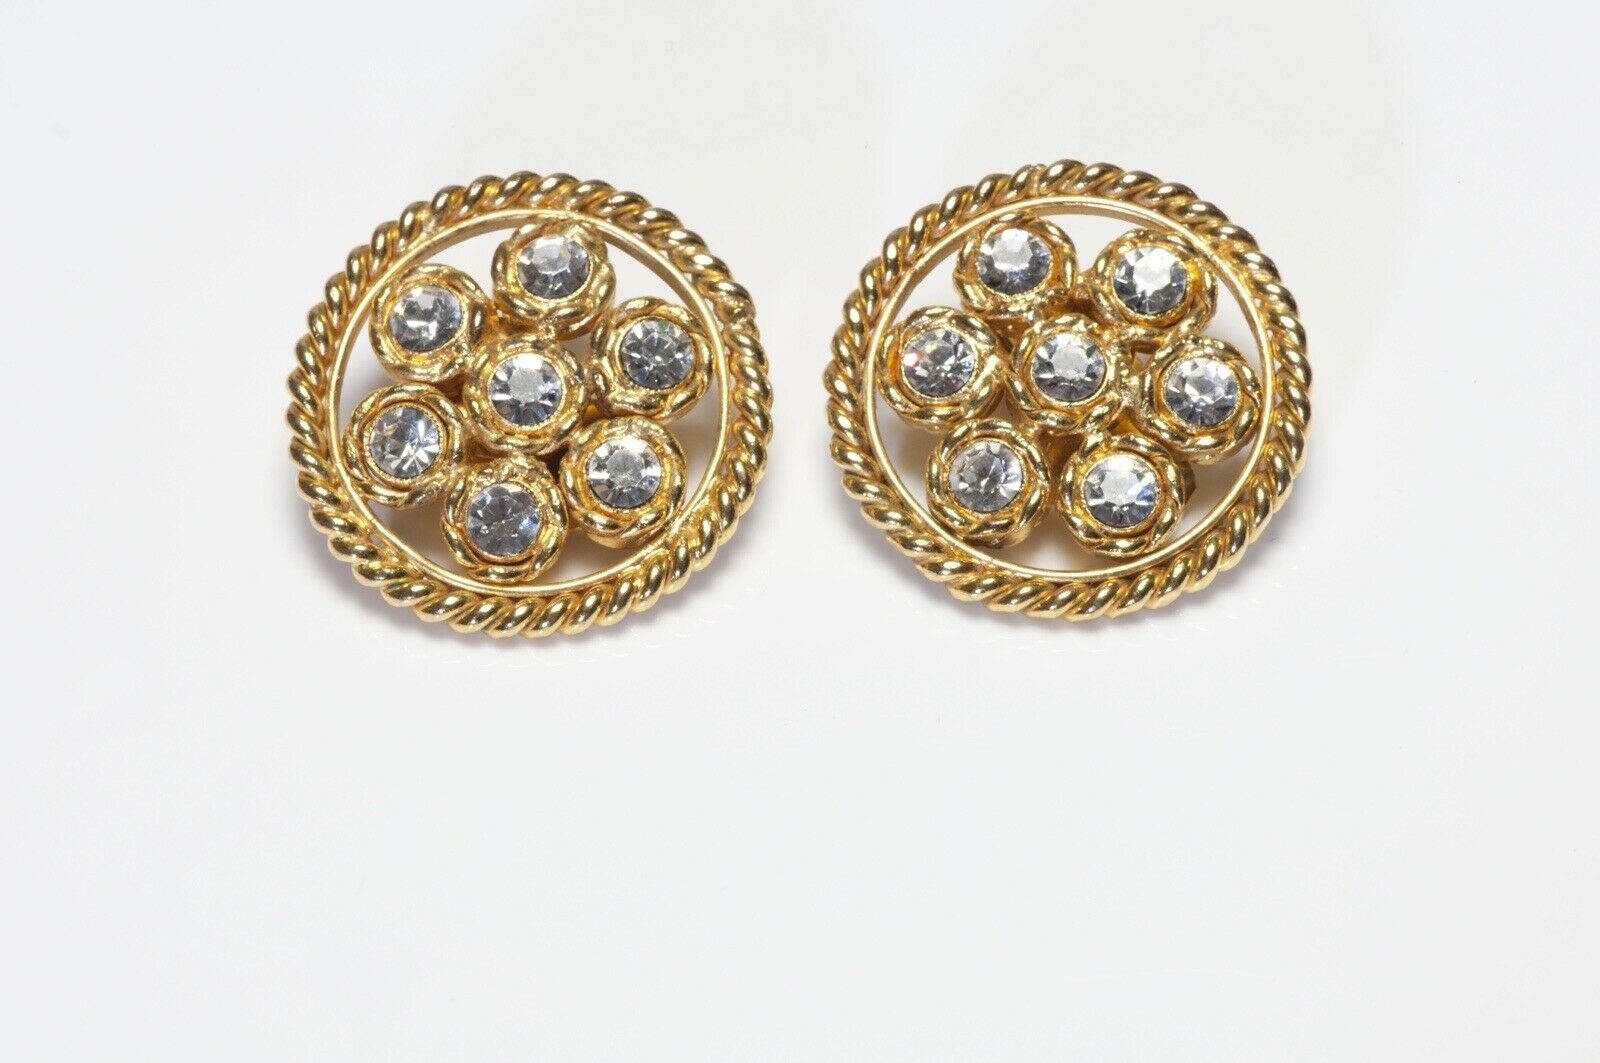 CHANEL Paris 1970’s Gold Plated Crystal Round Earrings